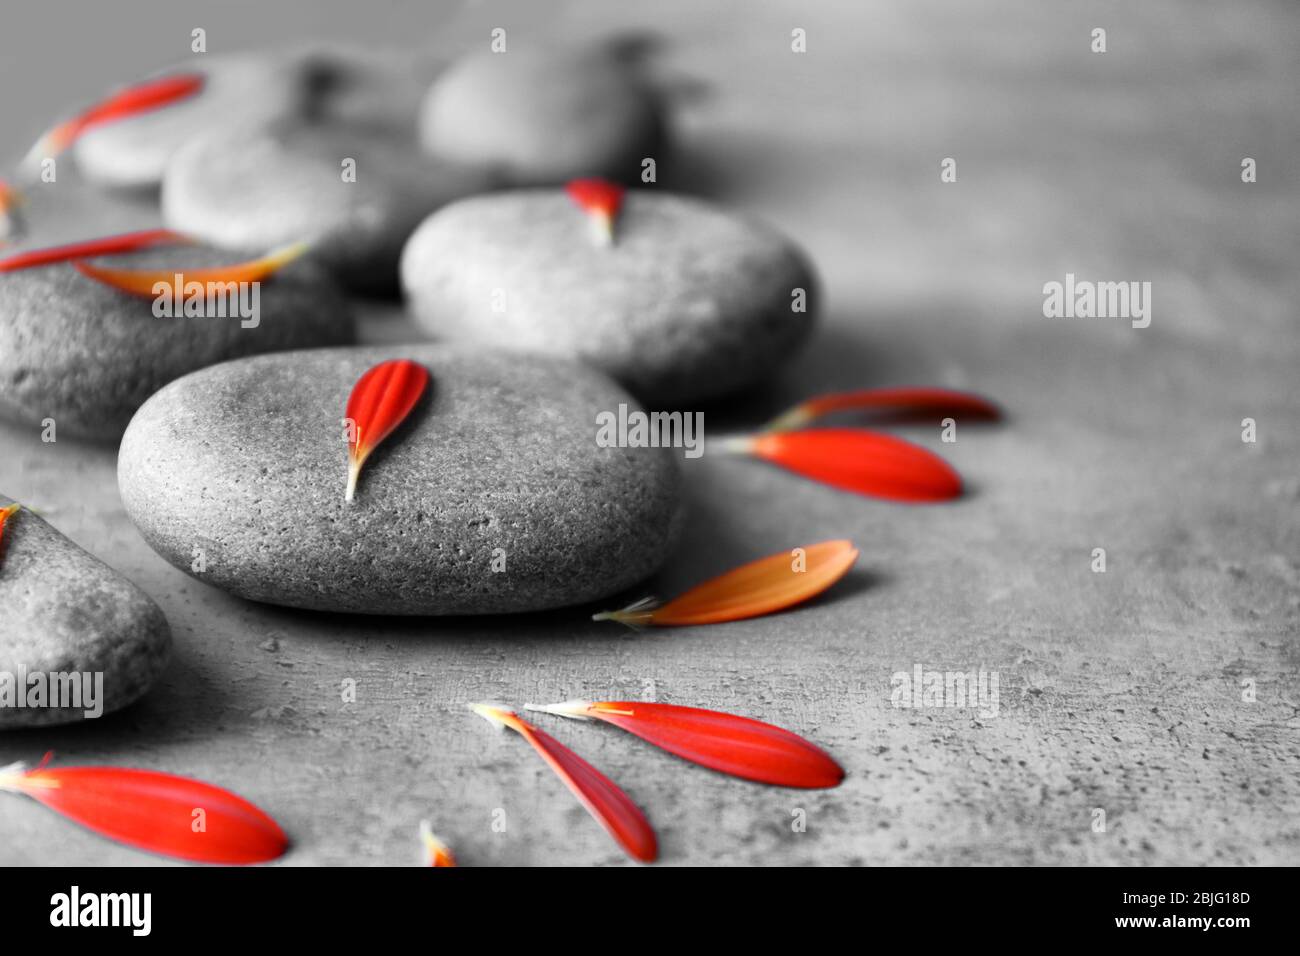 Spa stones and chrysanthemum petals on gray table Stock Photo